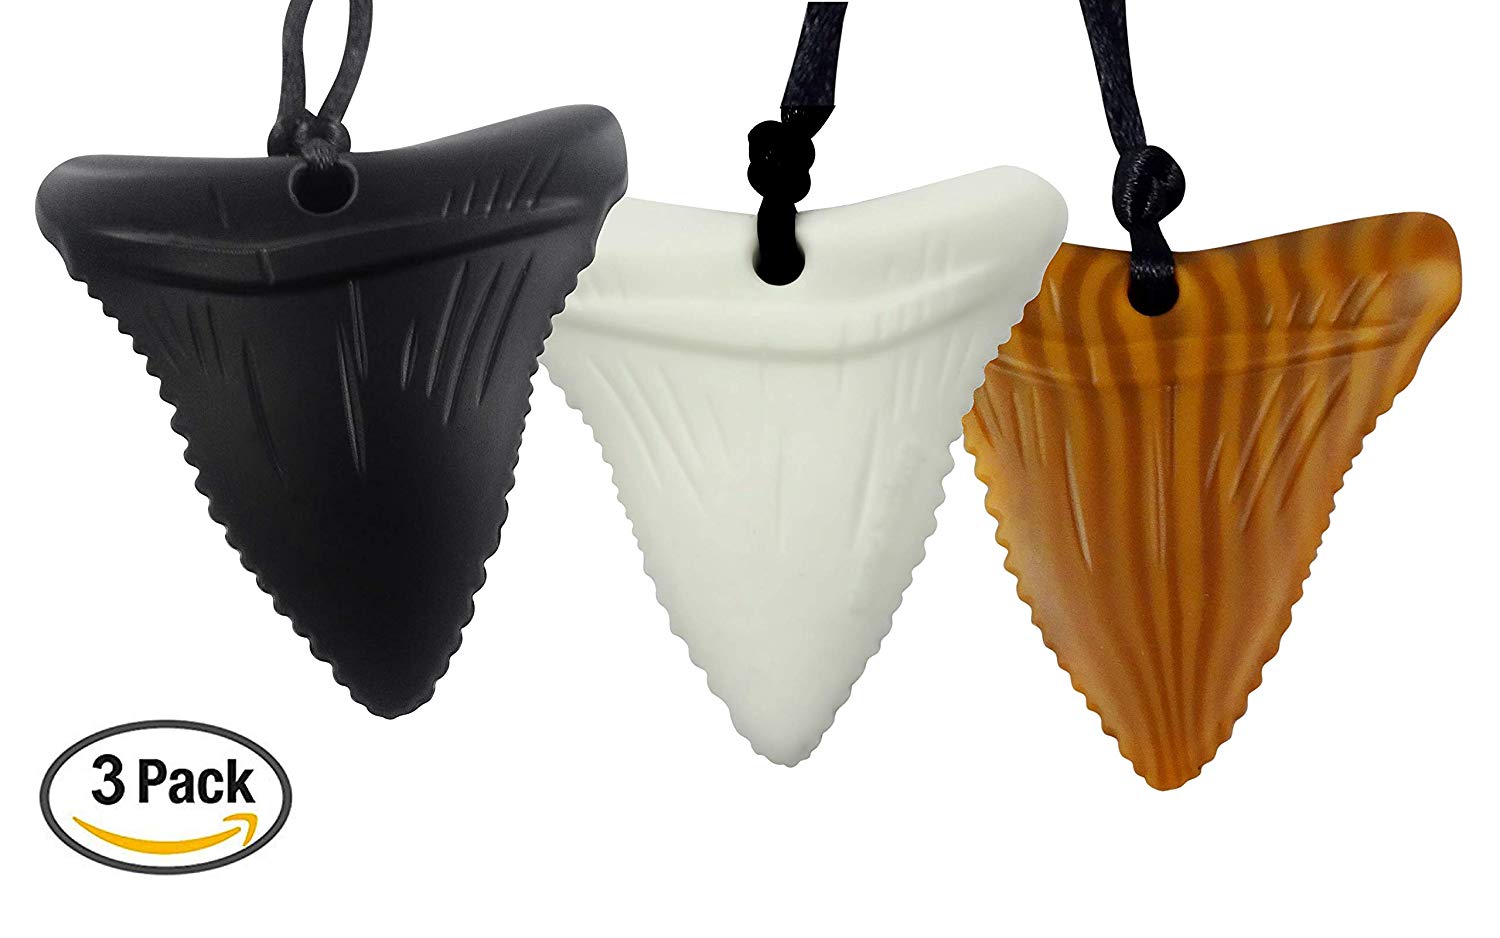 NEW Three Pack Shark Tooth Teething Necklaces! Food grade BPA Free Silicone! #Teething #Baby #SensoryProcessingDisorder